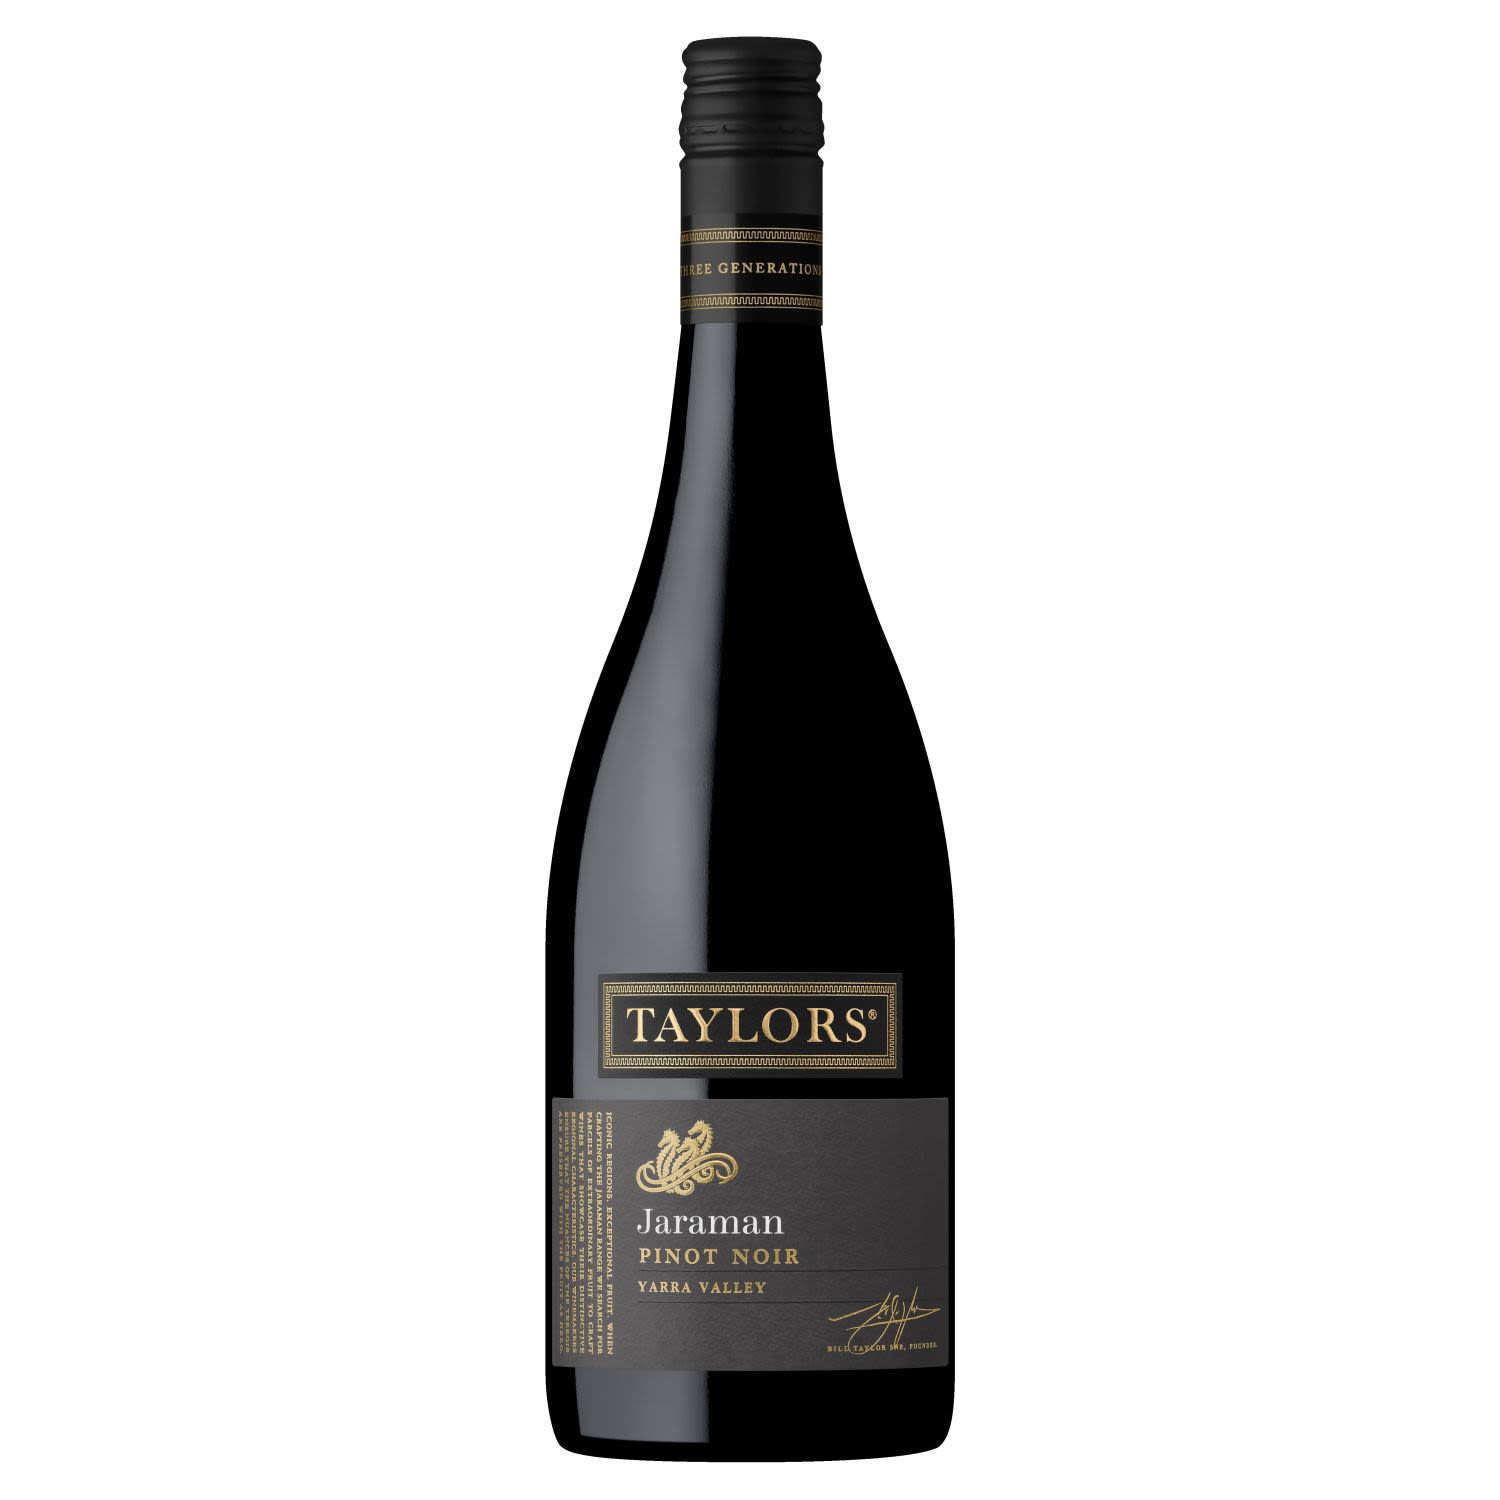 Well structured and balanced with smooth tannins, full of juicy red fruit and violet characters<br /> <br />Alcohol Volume: 14.50%<br /><br />Pack Format: 6 Pack<br /><br />Standard Drinks: 8.3</br /><br />Pack Type: Bottle<br /><br />Country of Origin: Australia<br /><br />Region: Yarra Valley<br /><br />Vintage: Non Vintage<br />